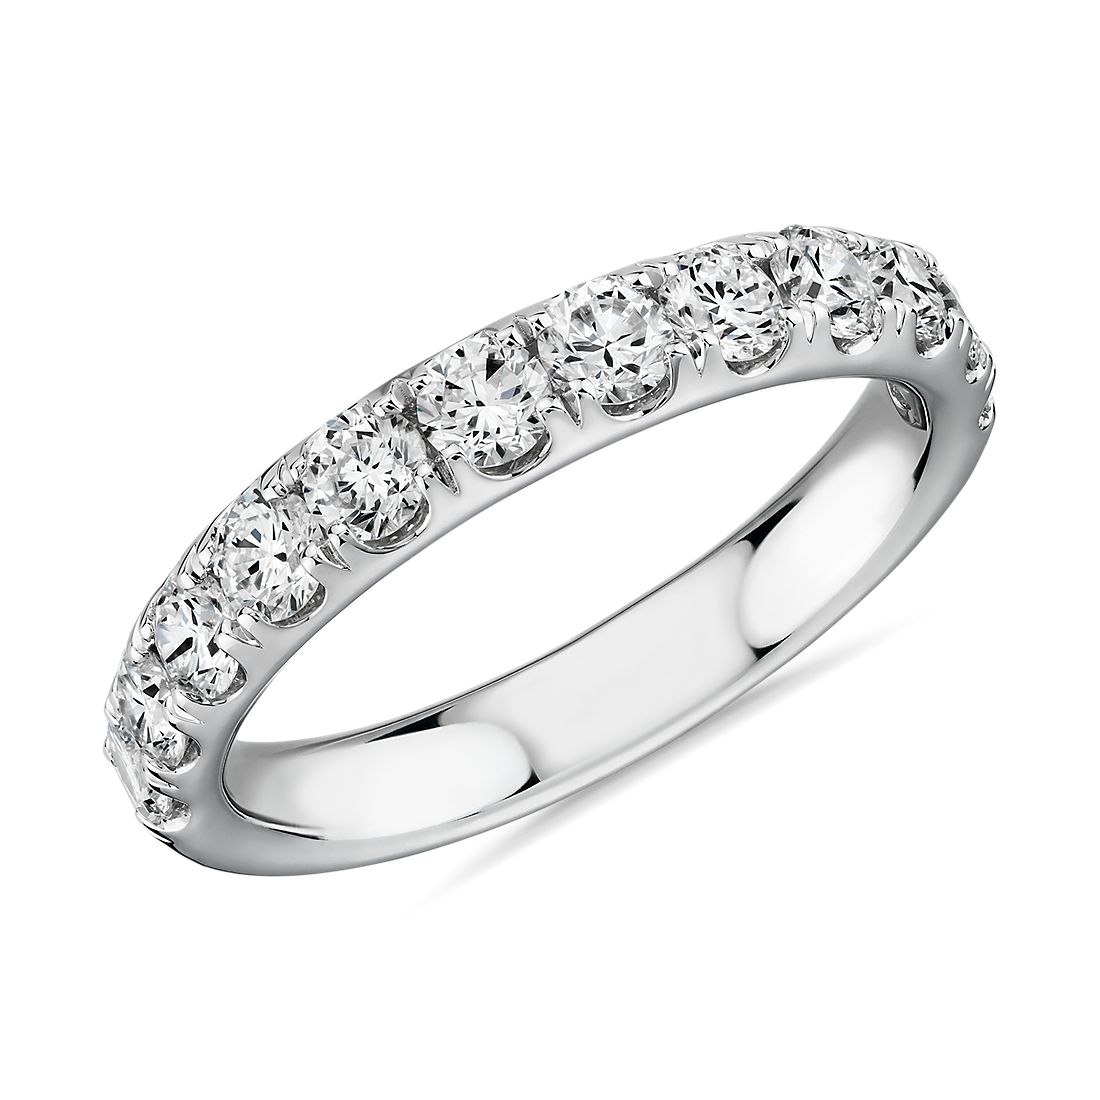 Riviera Pave Diamond Ring in 14k White Gold (0.96 ct. tw.)